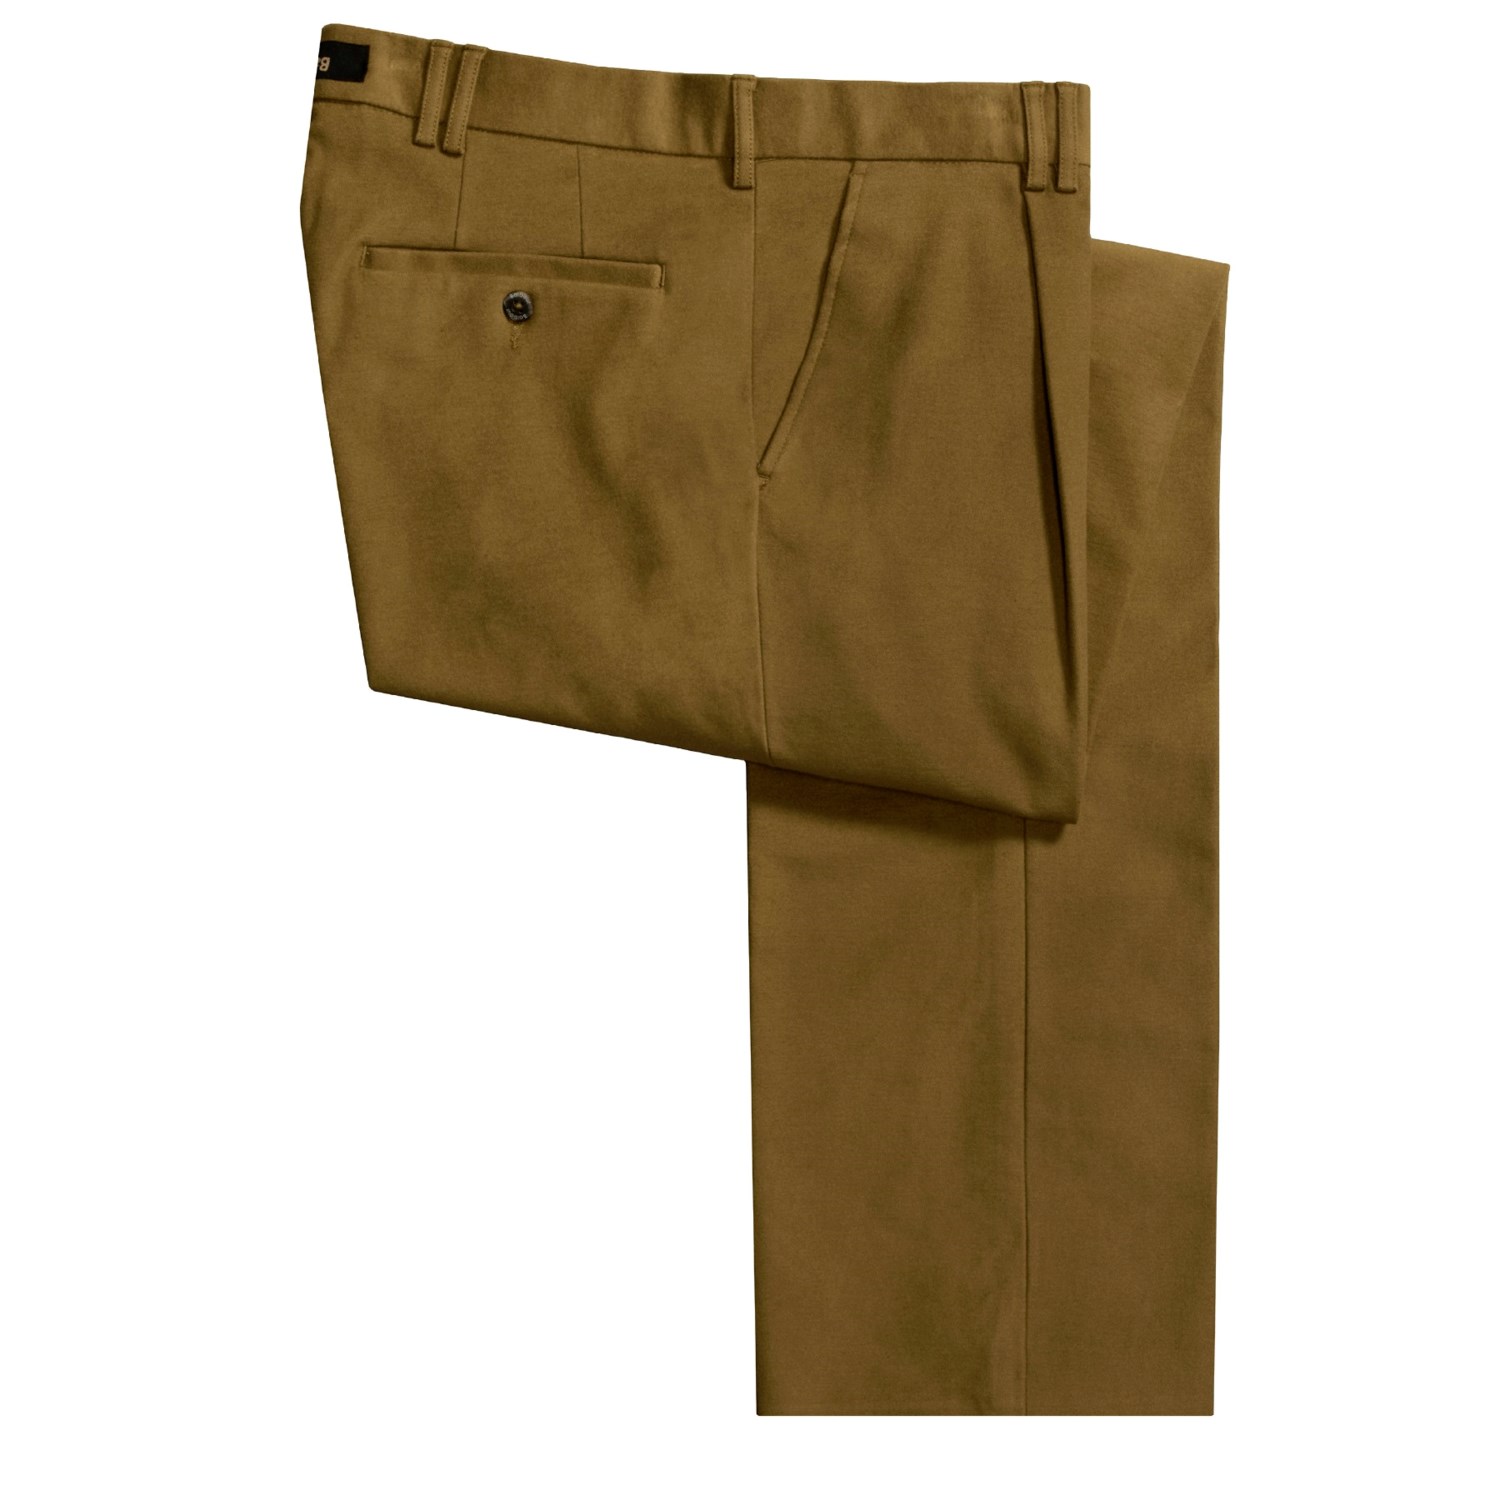 Barbour Relaxed Fit Moleskin Pants (For Men) 2032Y - Save 45%